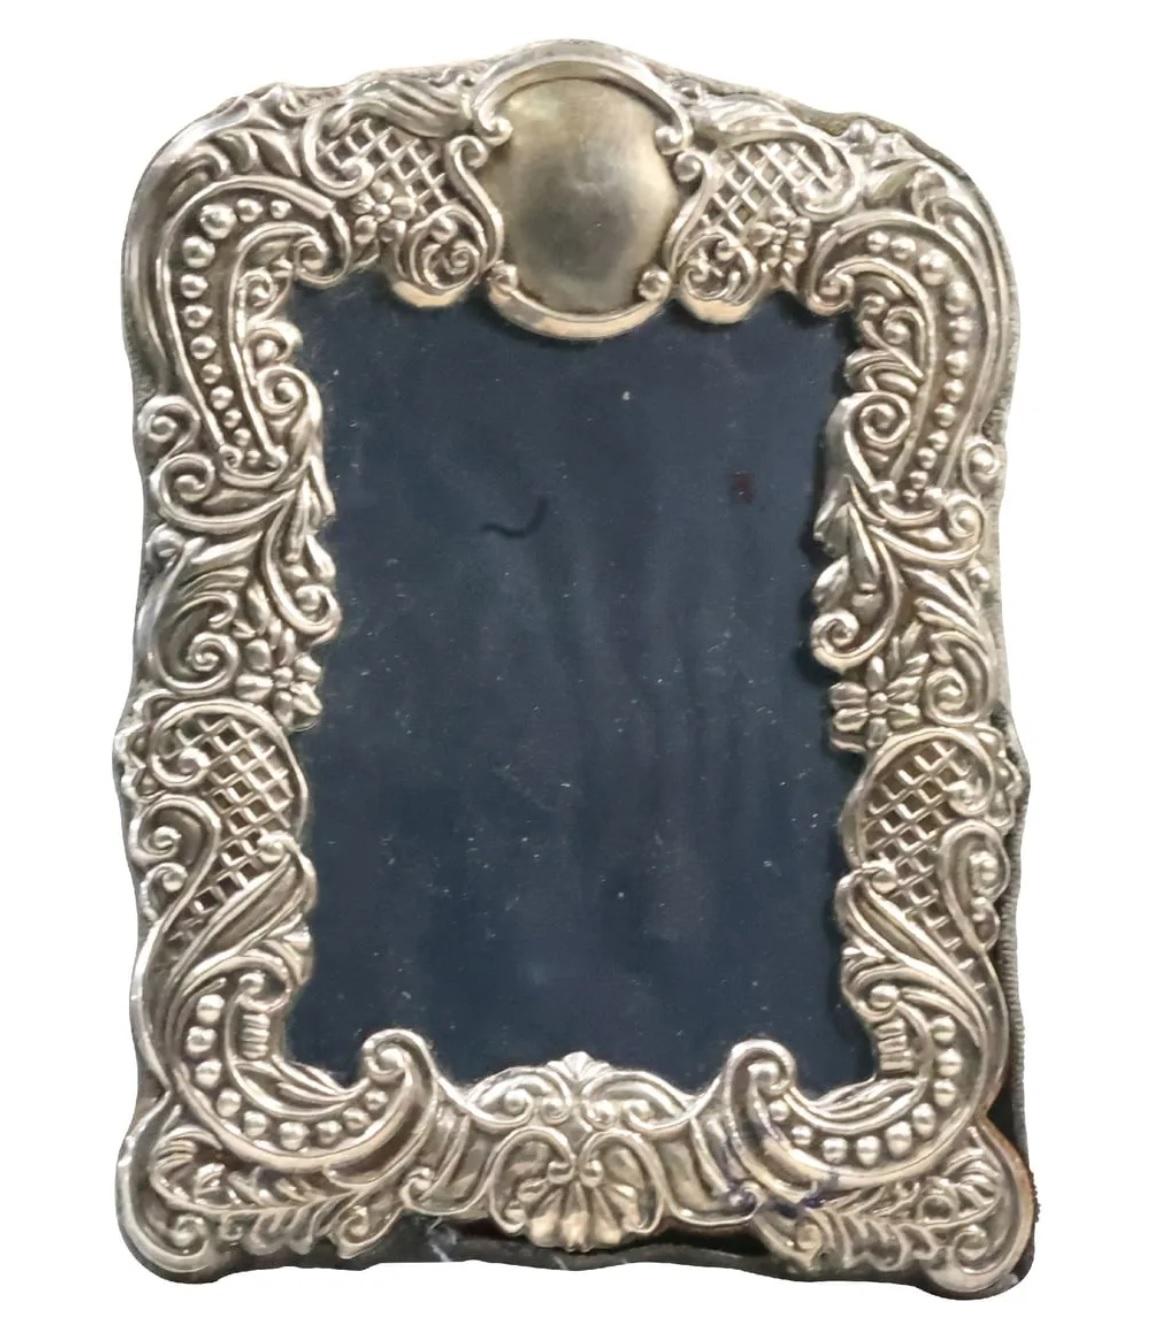 20th century sterling silver picture frame with ornate decorative border. 